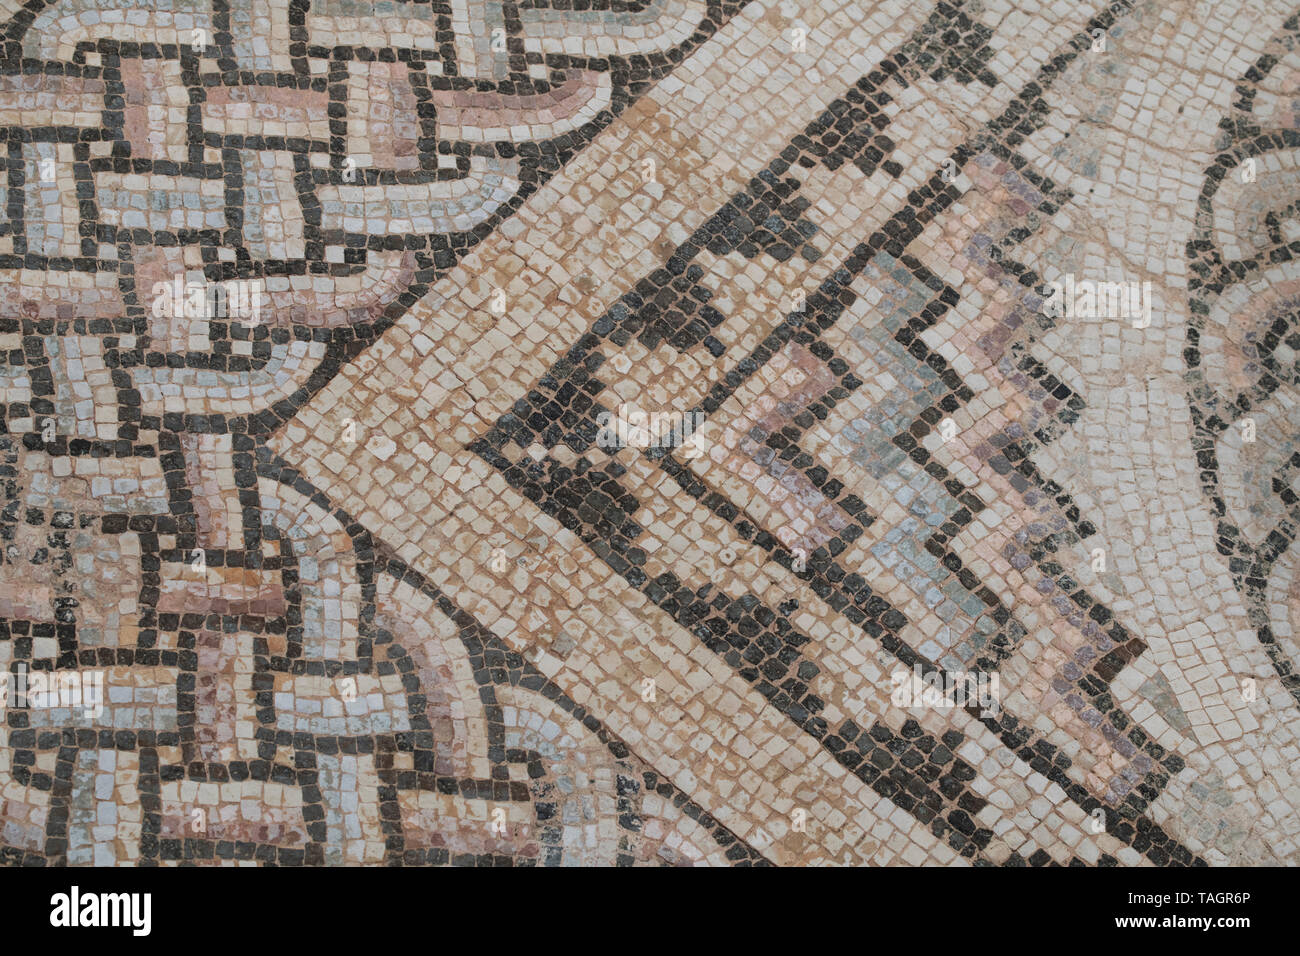 Cyprus, ancient archaeological site of Kourion. Detail of ancient Roman mosaic floor with ornate geometric design. Stock Photo